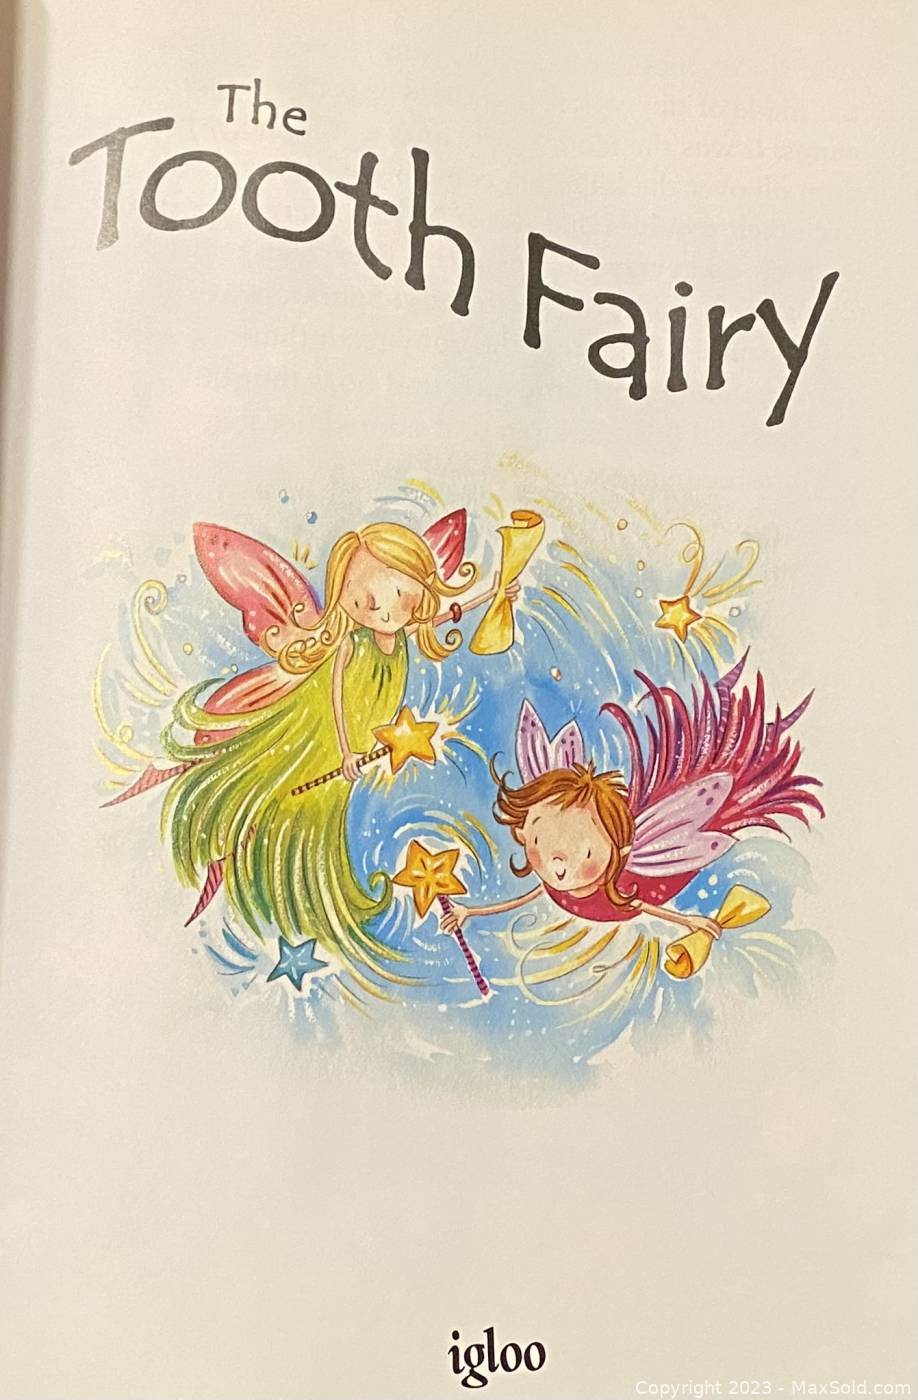 History of the tooth fairy in Burleson